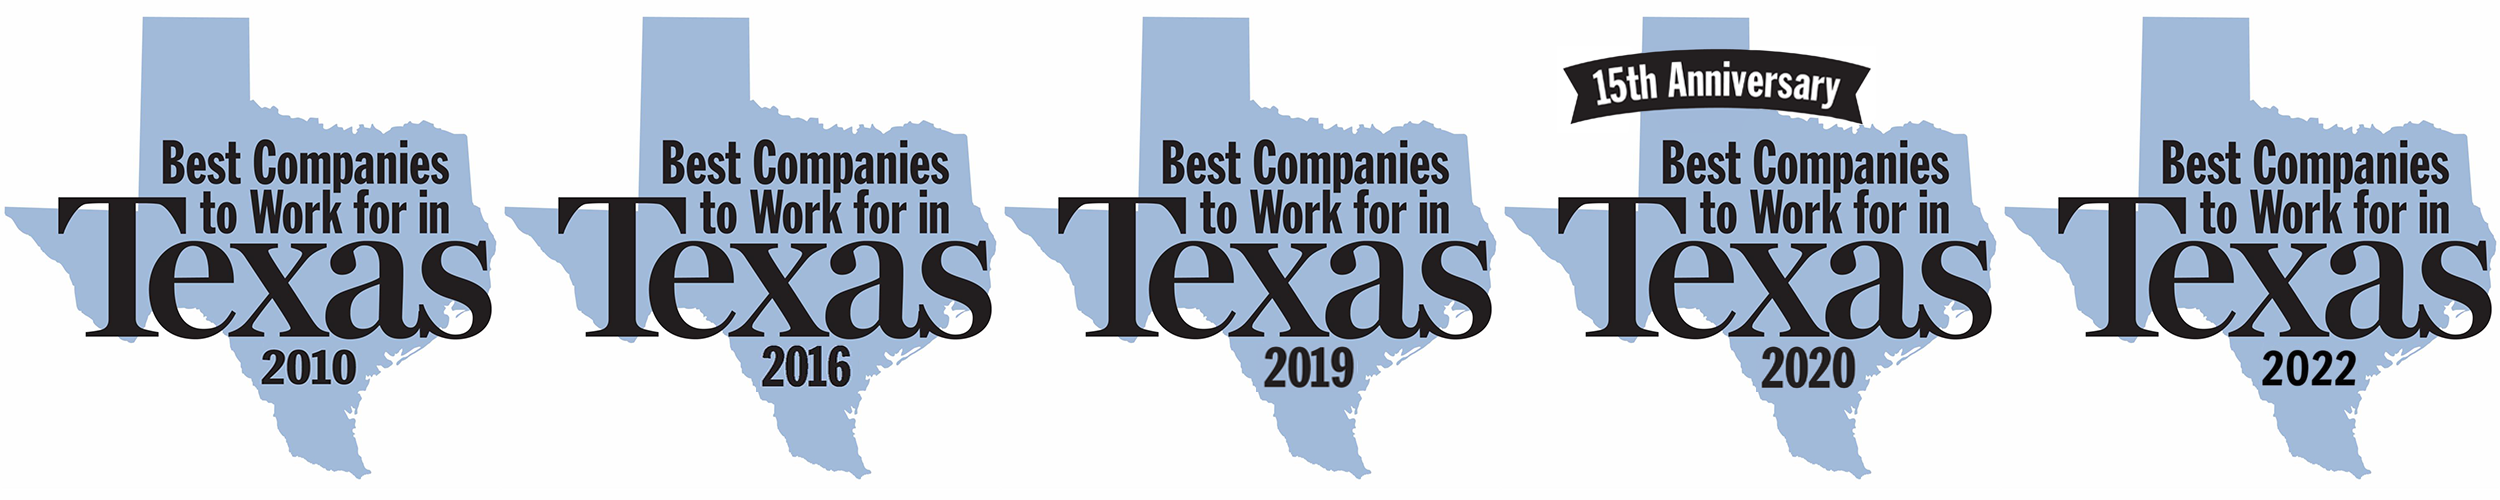 Best Companies to work for in Texas 2010, 2016, 2019, 2020, 2022